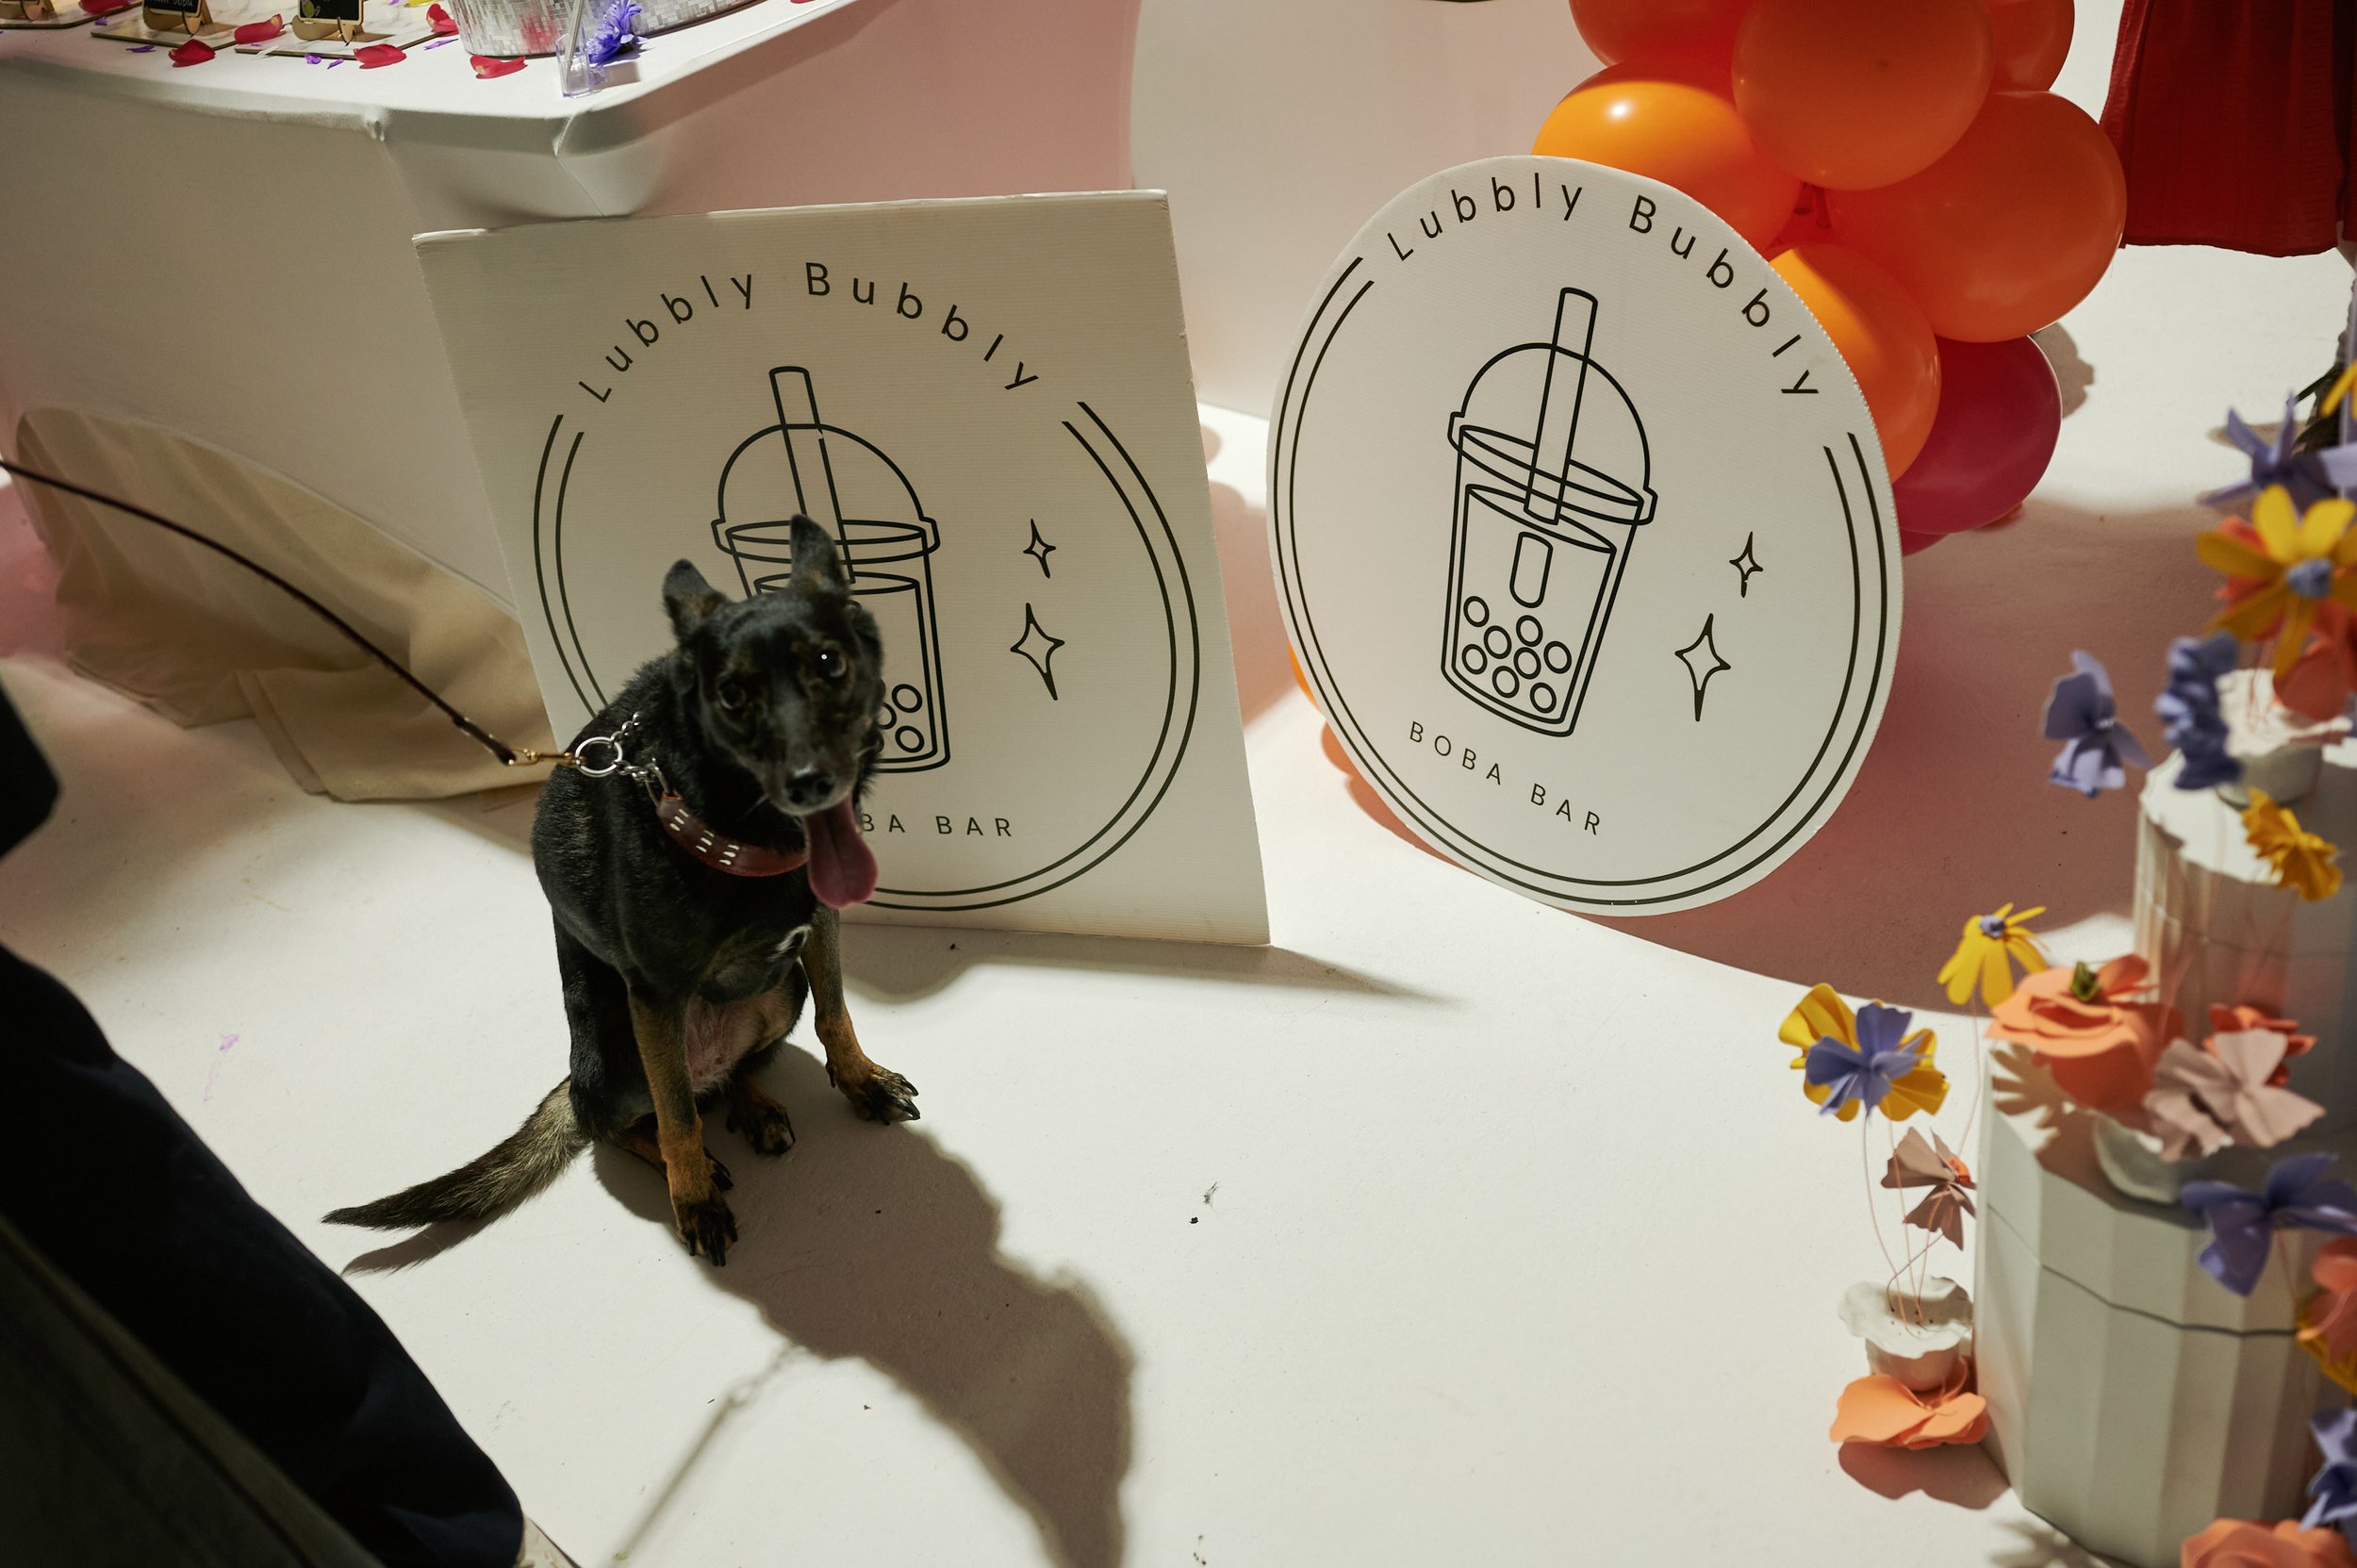  A little black dog at The Un-Wedding show, sitting by a sign that says ‘Lubbly Bubbly Boba Bar’ 